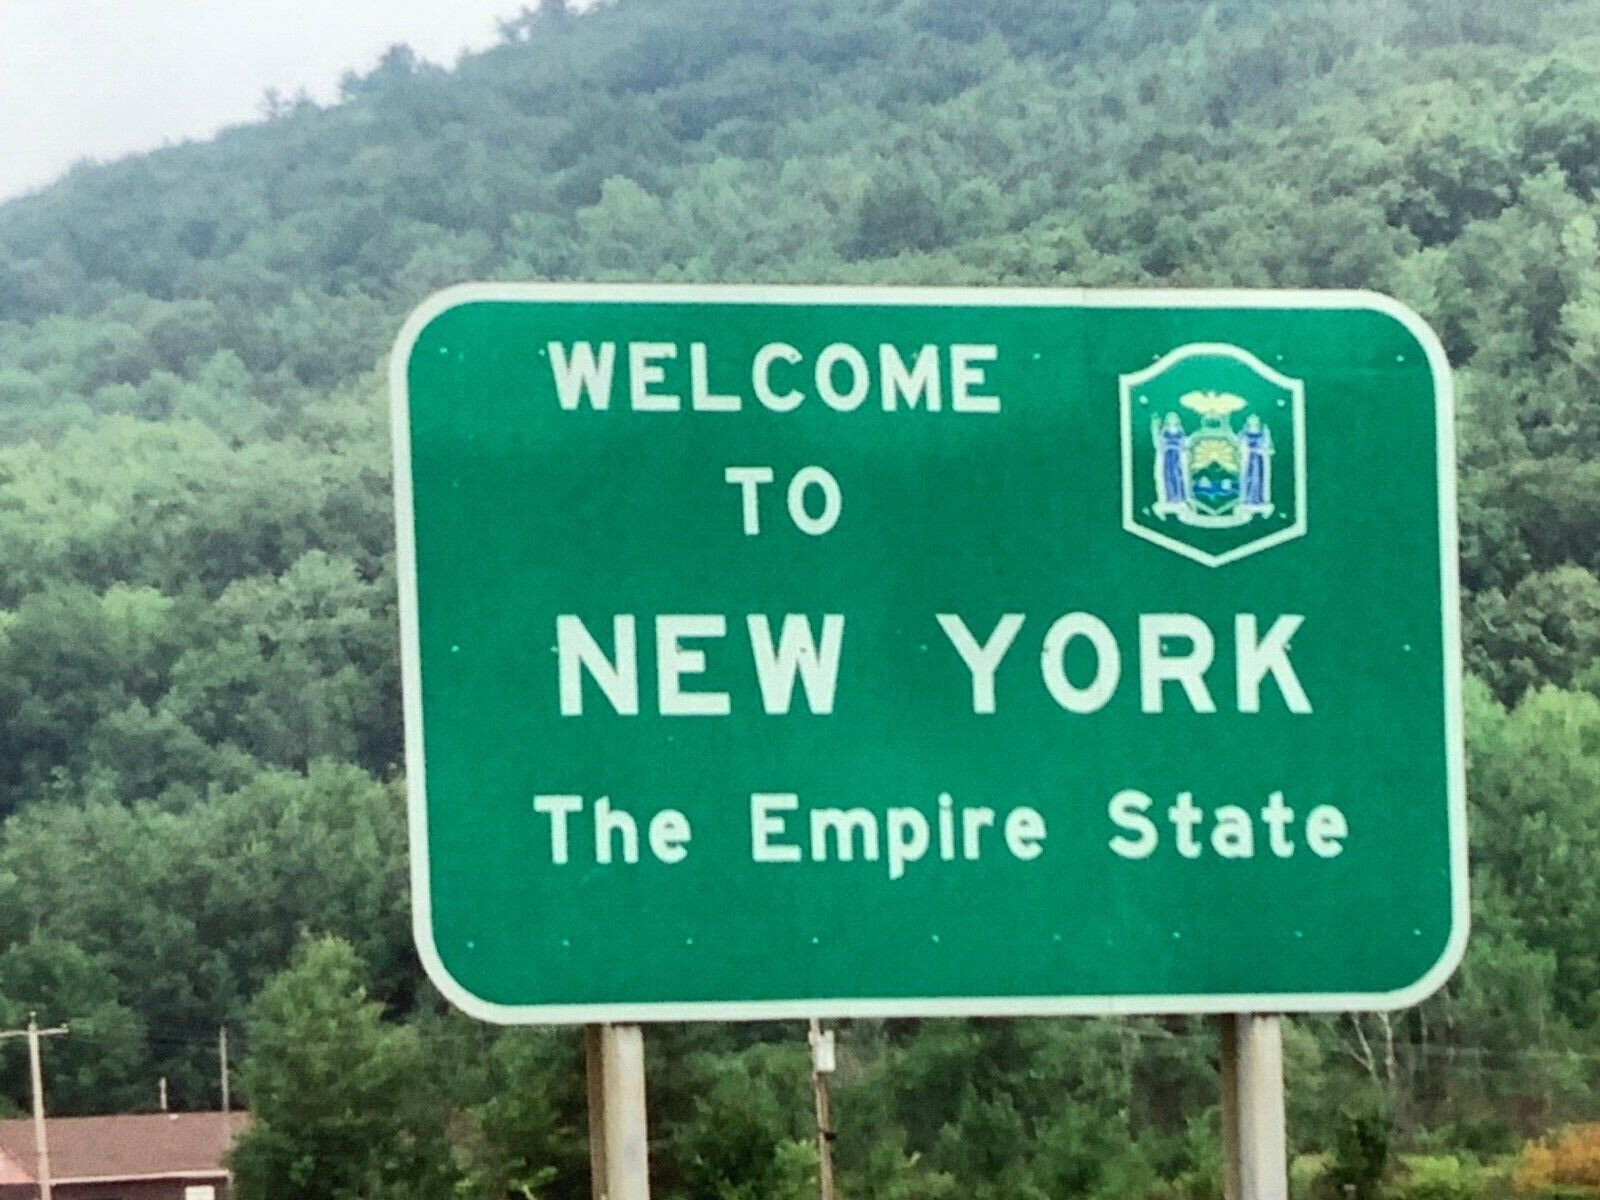 (AtC) FOUND Photograph 4x6 Color New York State Line Welcome Empire Road Sign